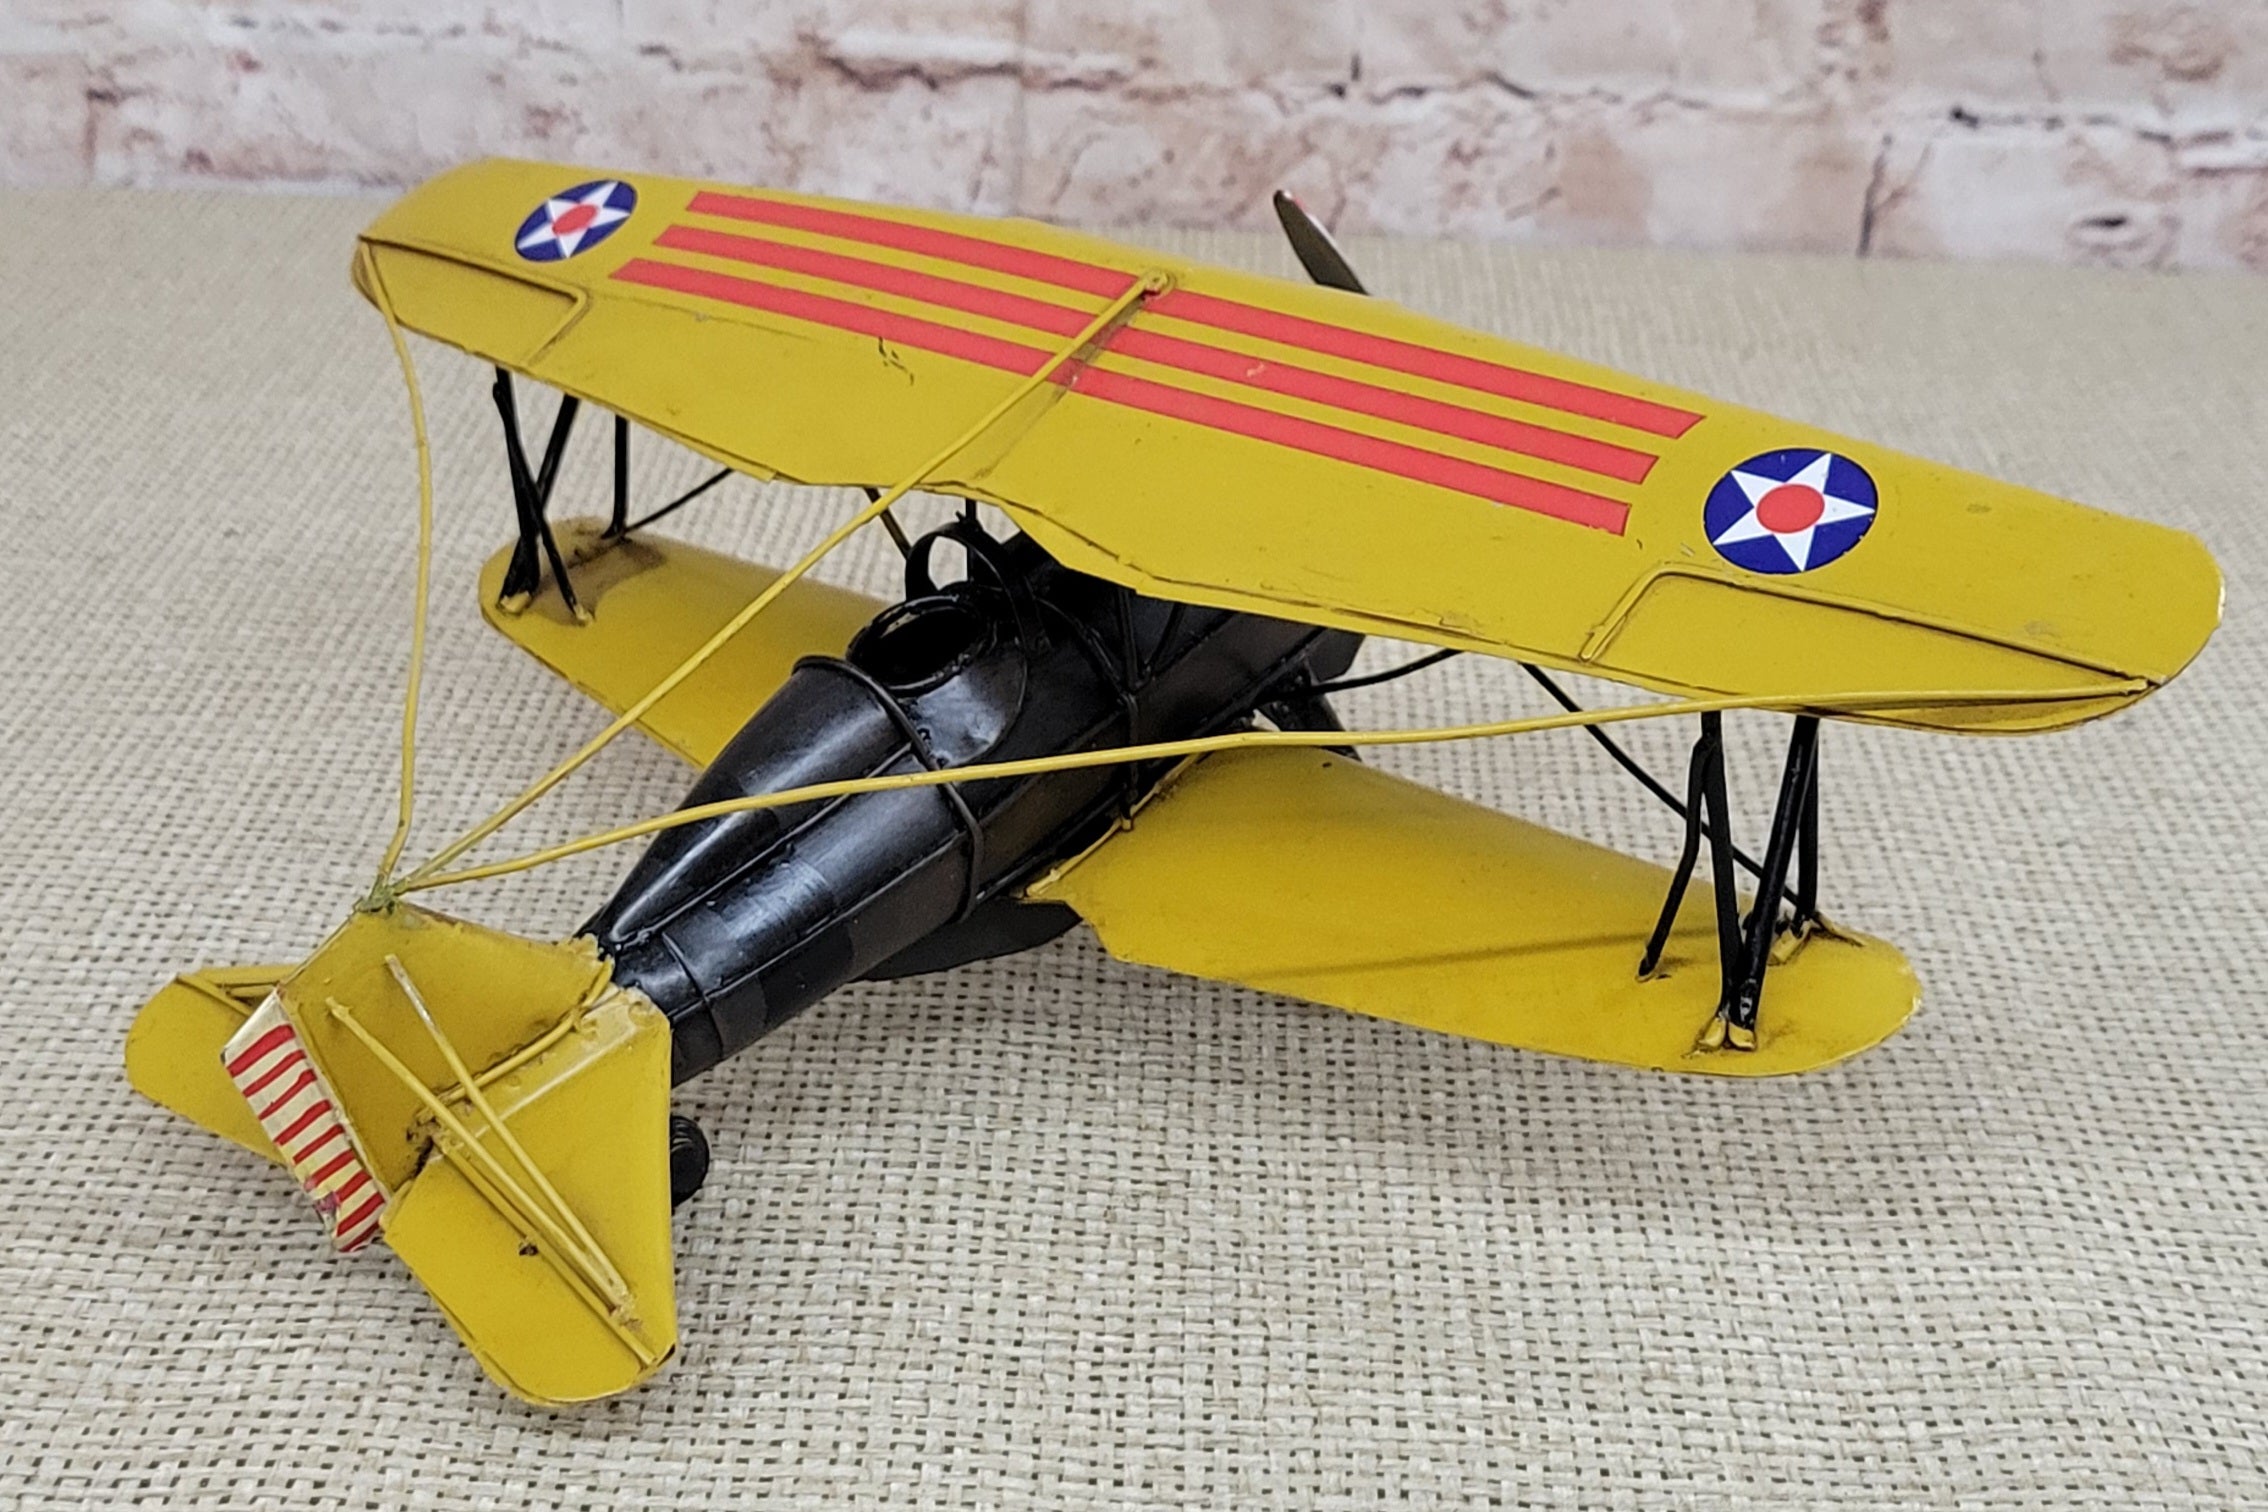 12" Home Decor Vintage Airplane Model Gifts Ornaments Iron Crafts Aircraft Decor